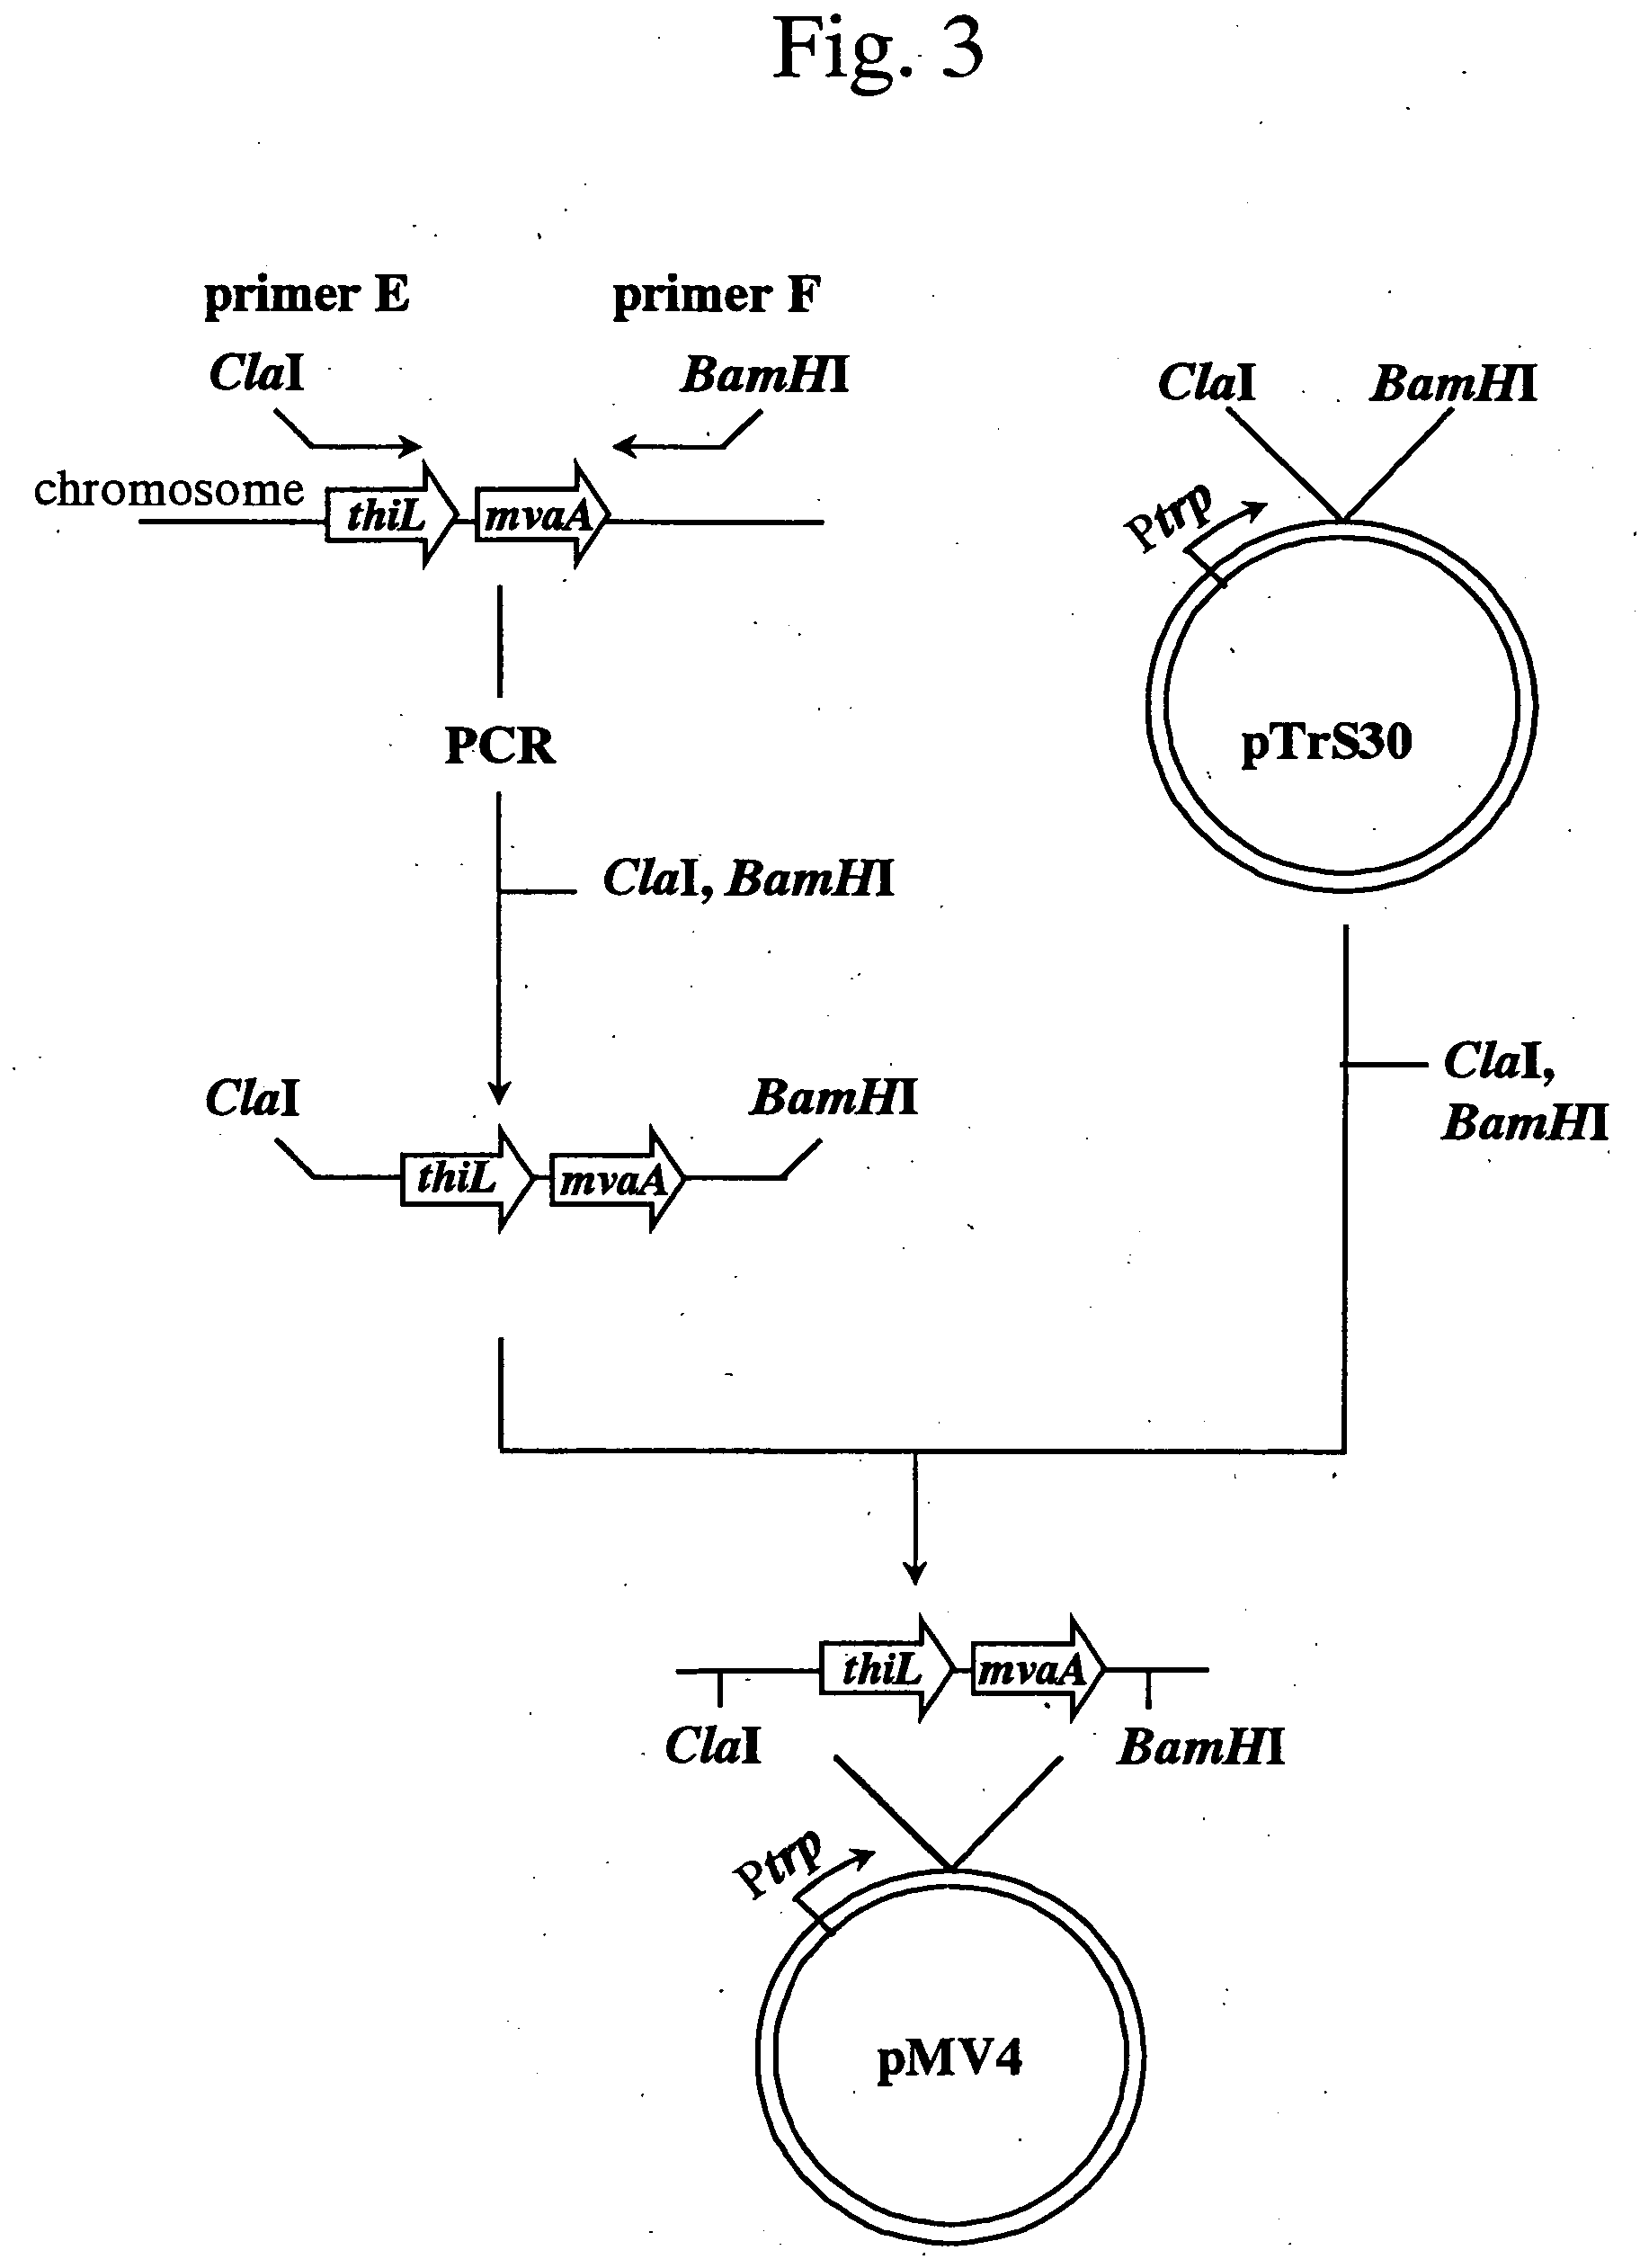 Process for producing mevalonic acid